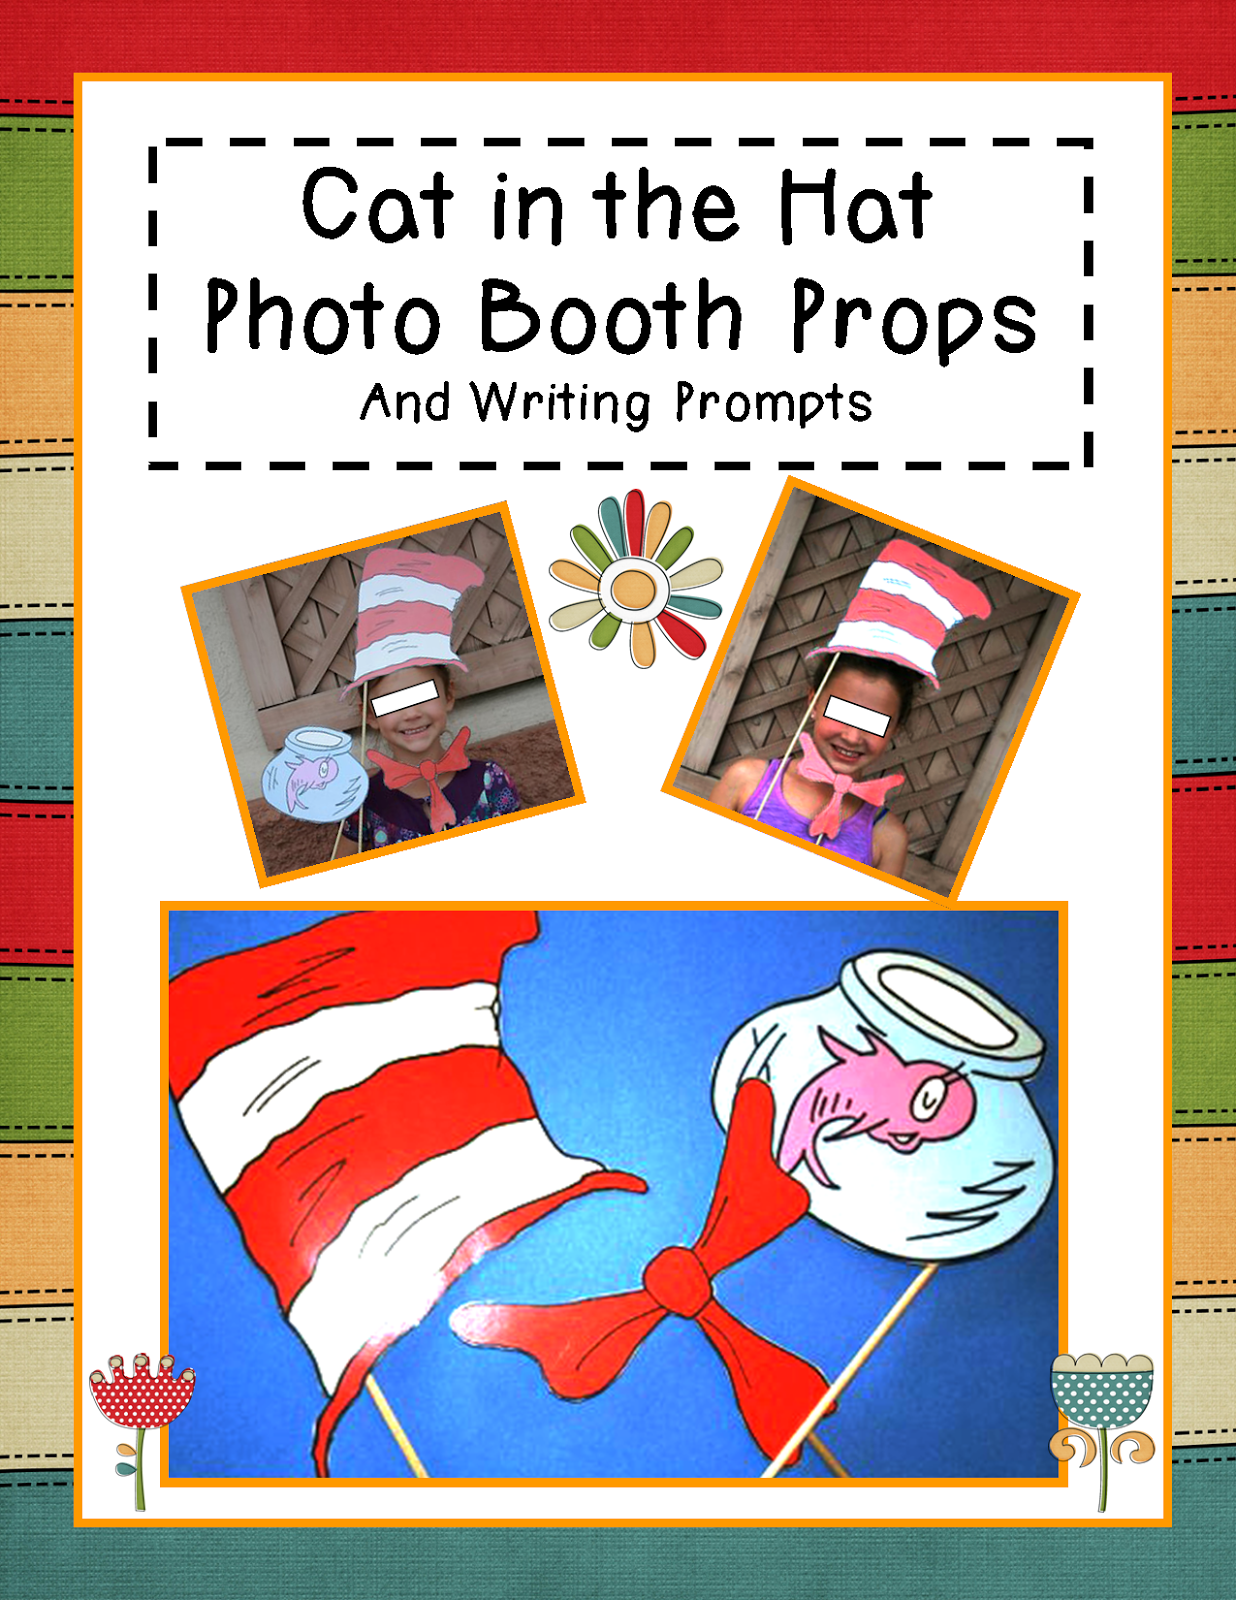 http://www.teacherspayteachers.com/Product/Happy-Birthday-Dr-Seuss-Photo-Booth-Props-and-Writing-Propmts-1130476